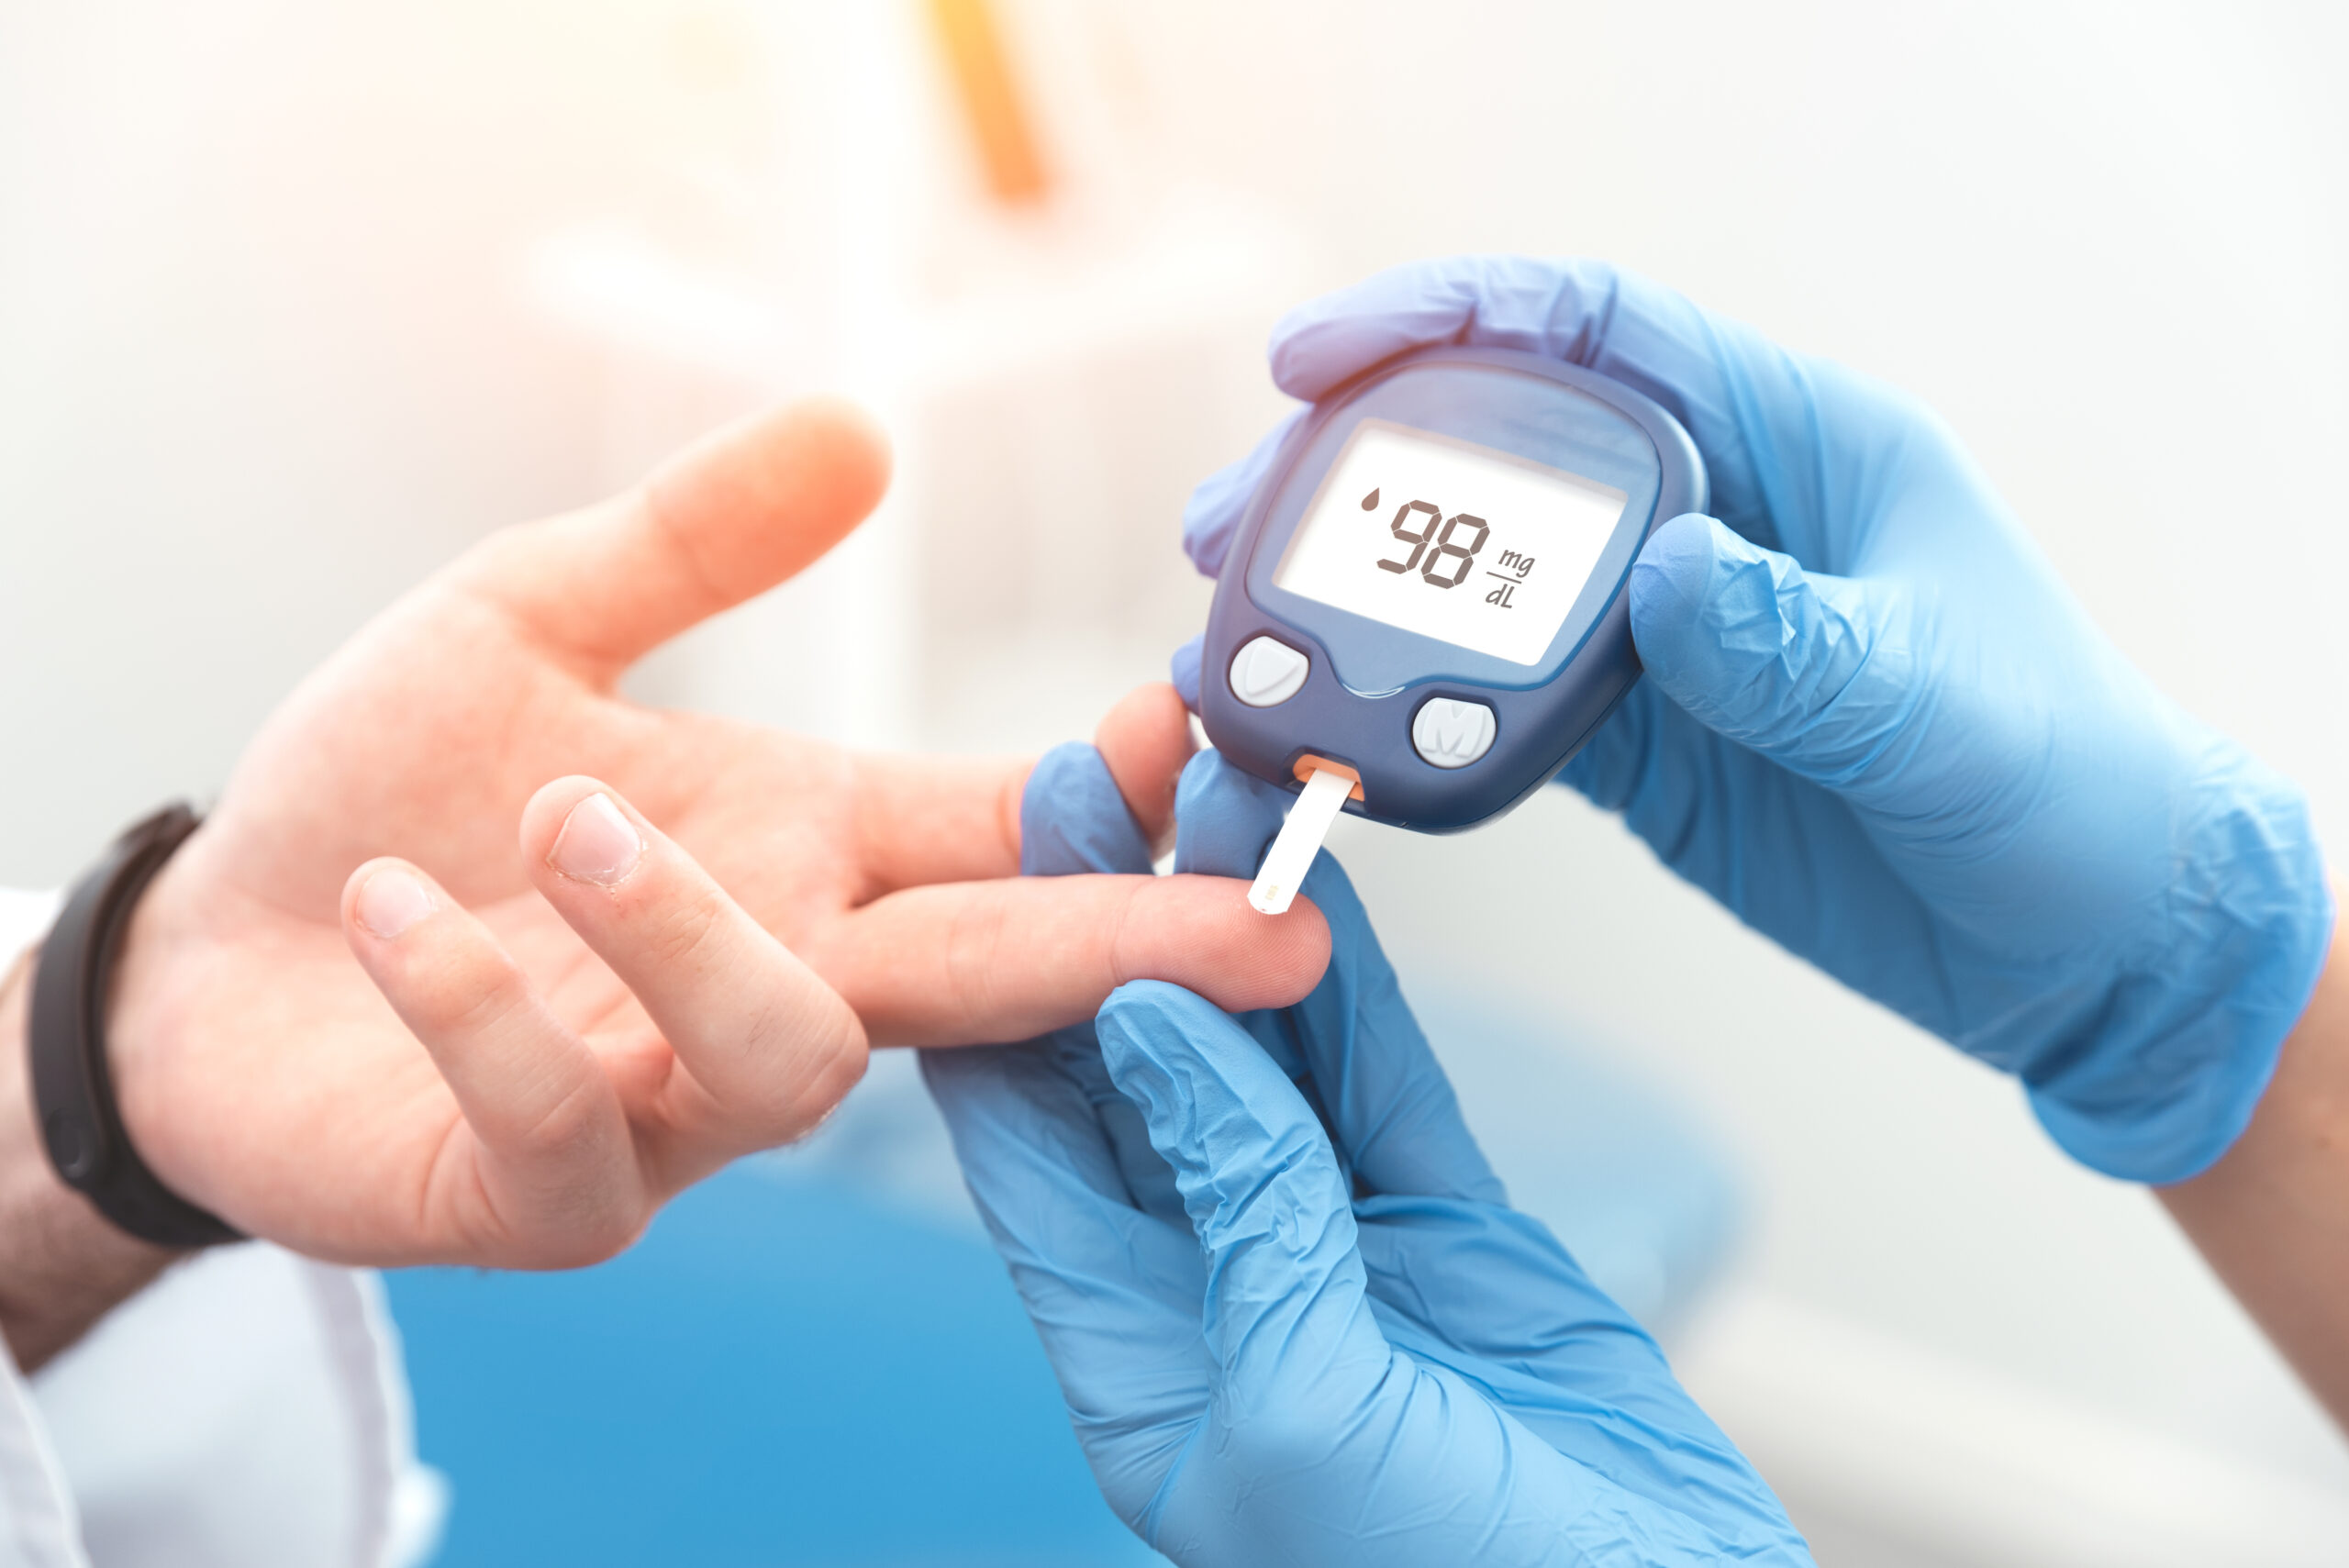 Diabetes: What Is, Symptoms, Causes, Treatment, and Prevention